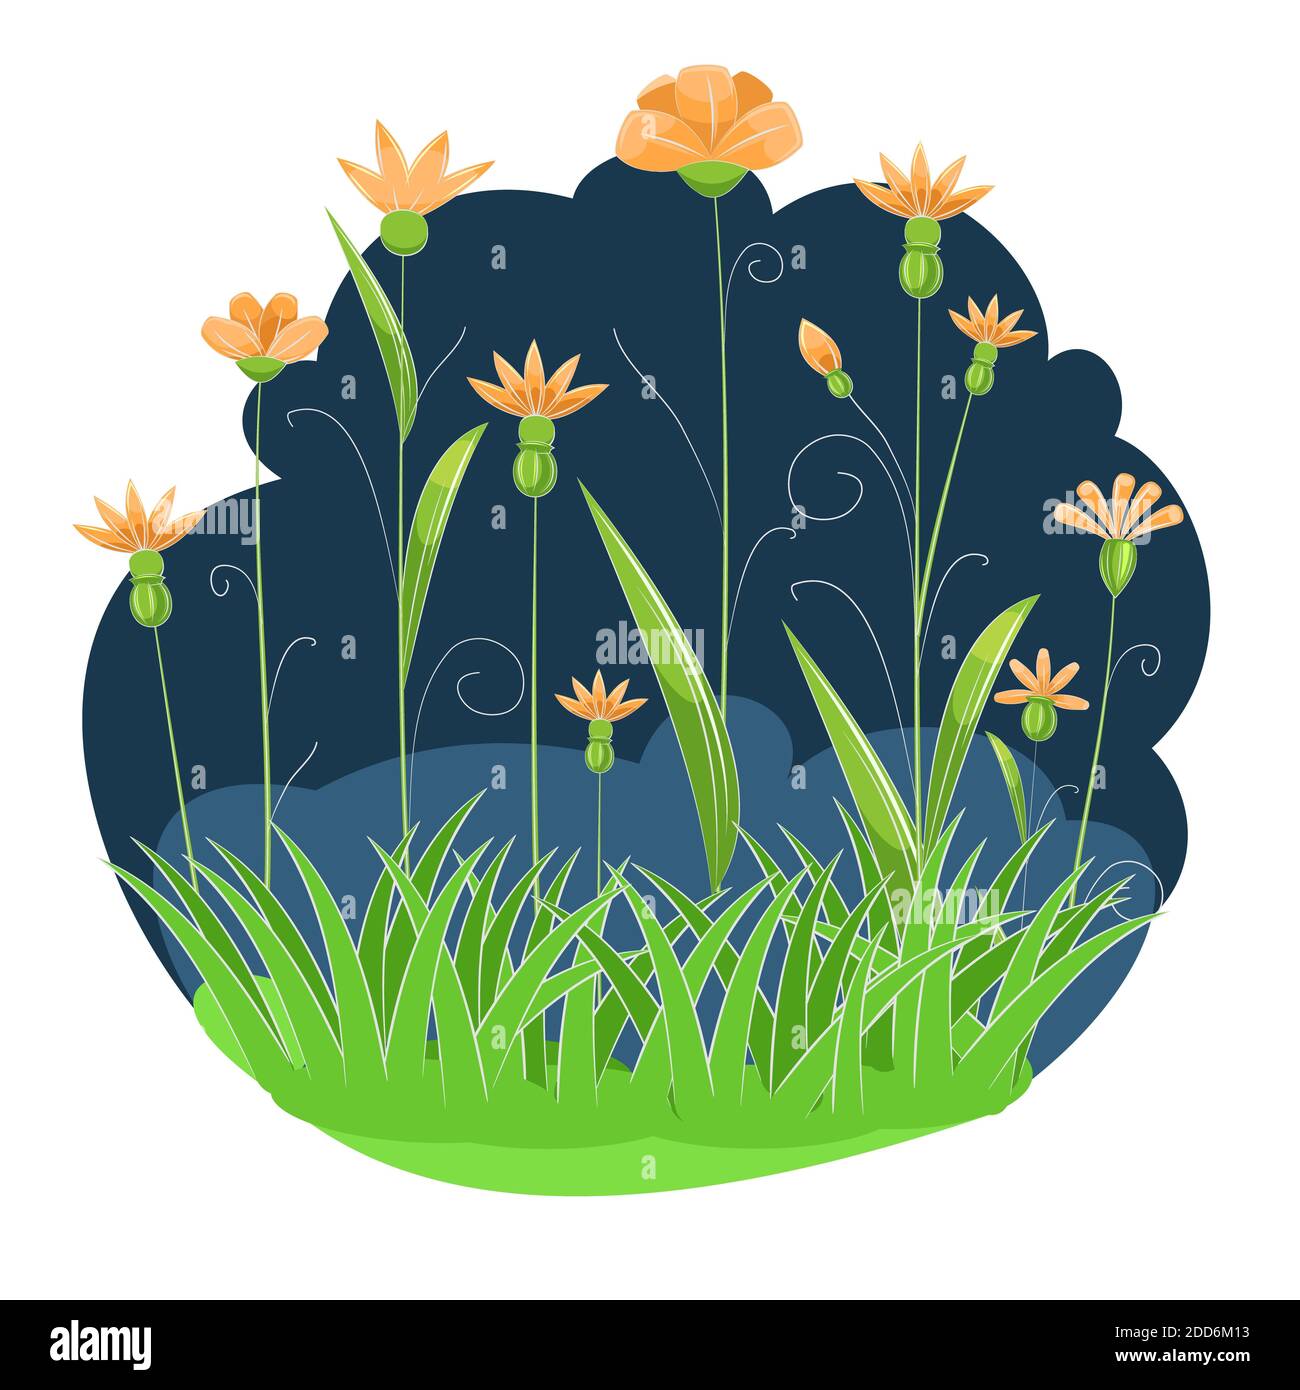 Blooming meadow with grass, flowers. Green night landscape. Cartoon style. Fabulous illustration. Background image isolated on white. Beautiful Stock Photo